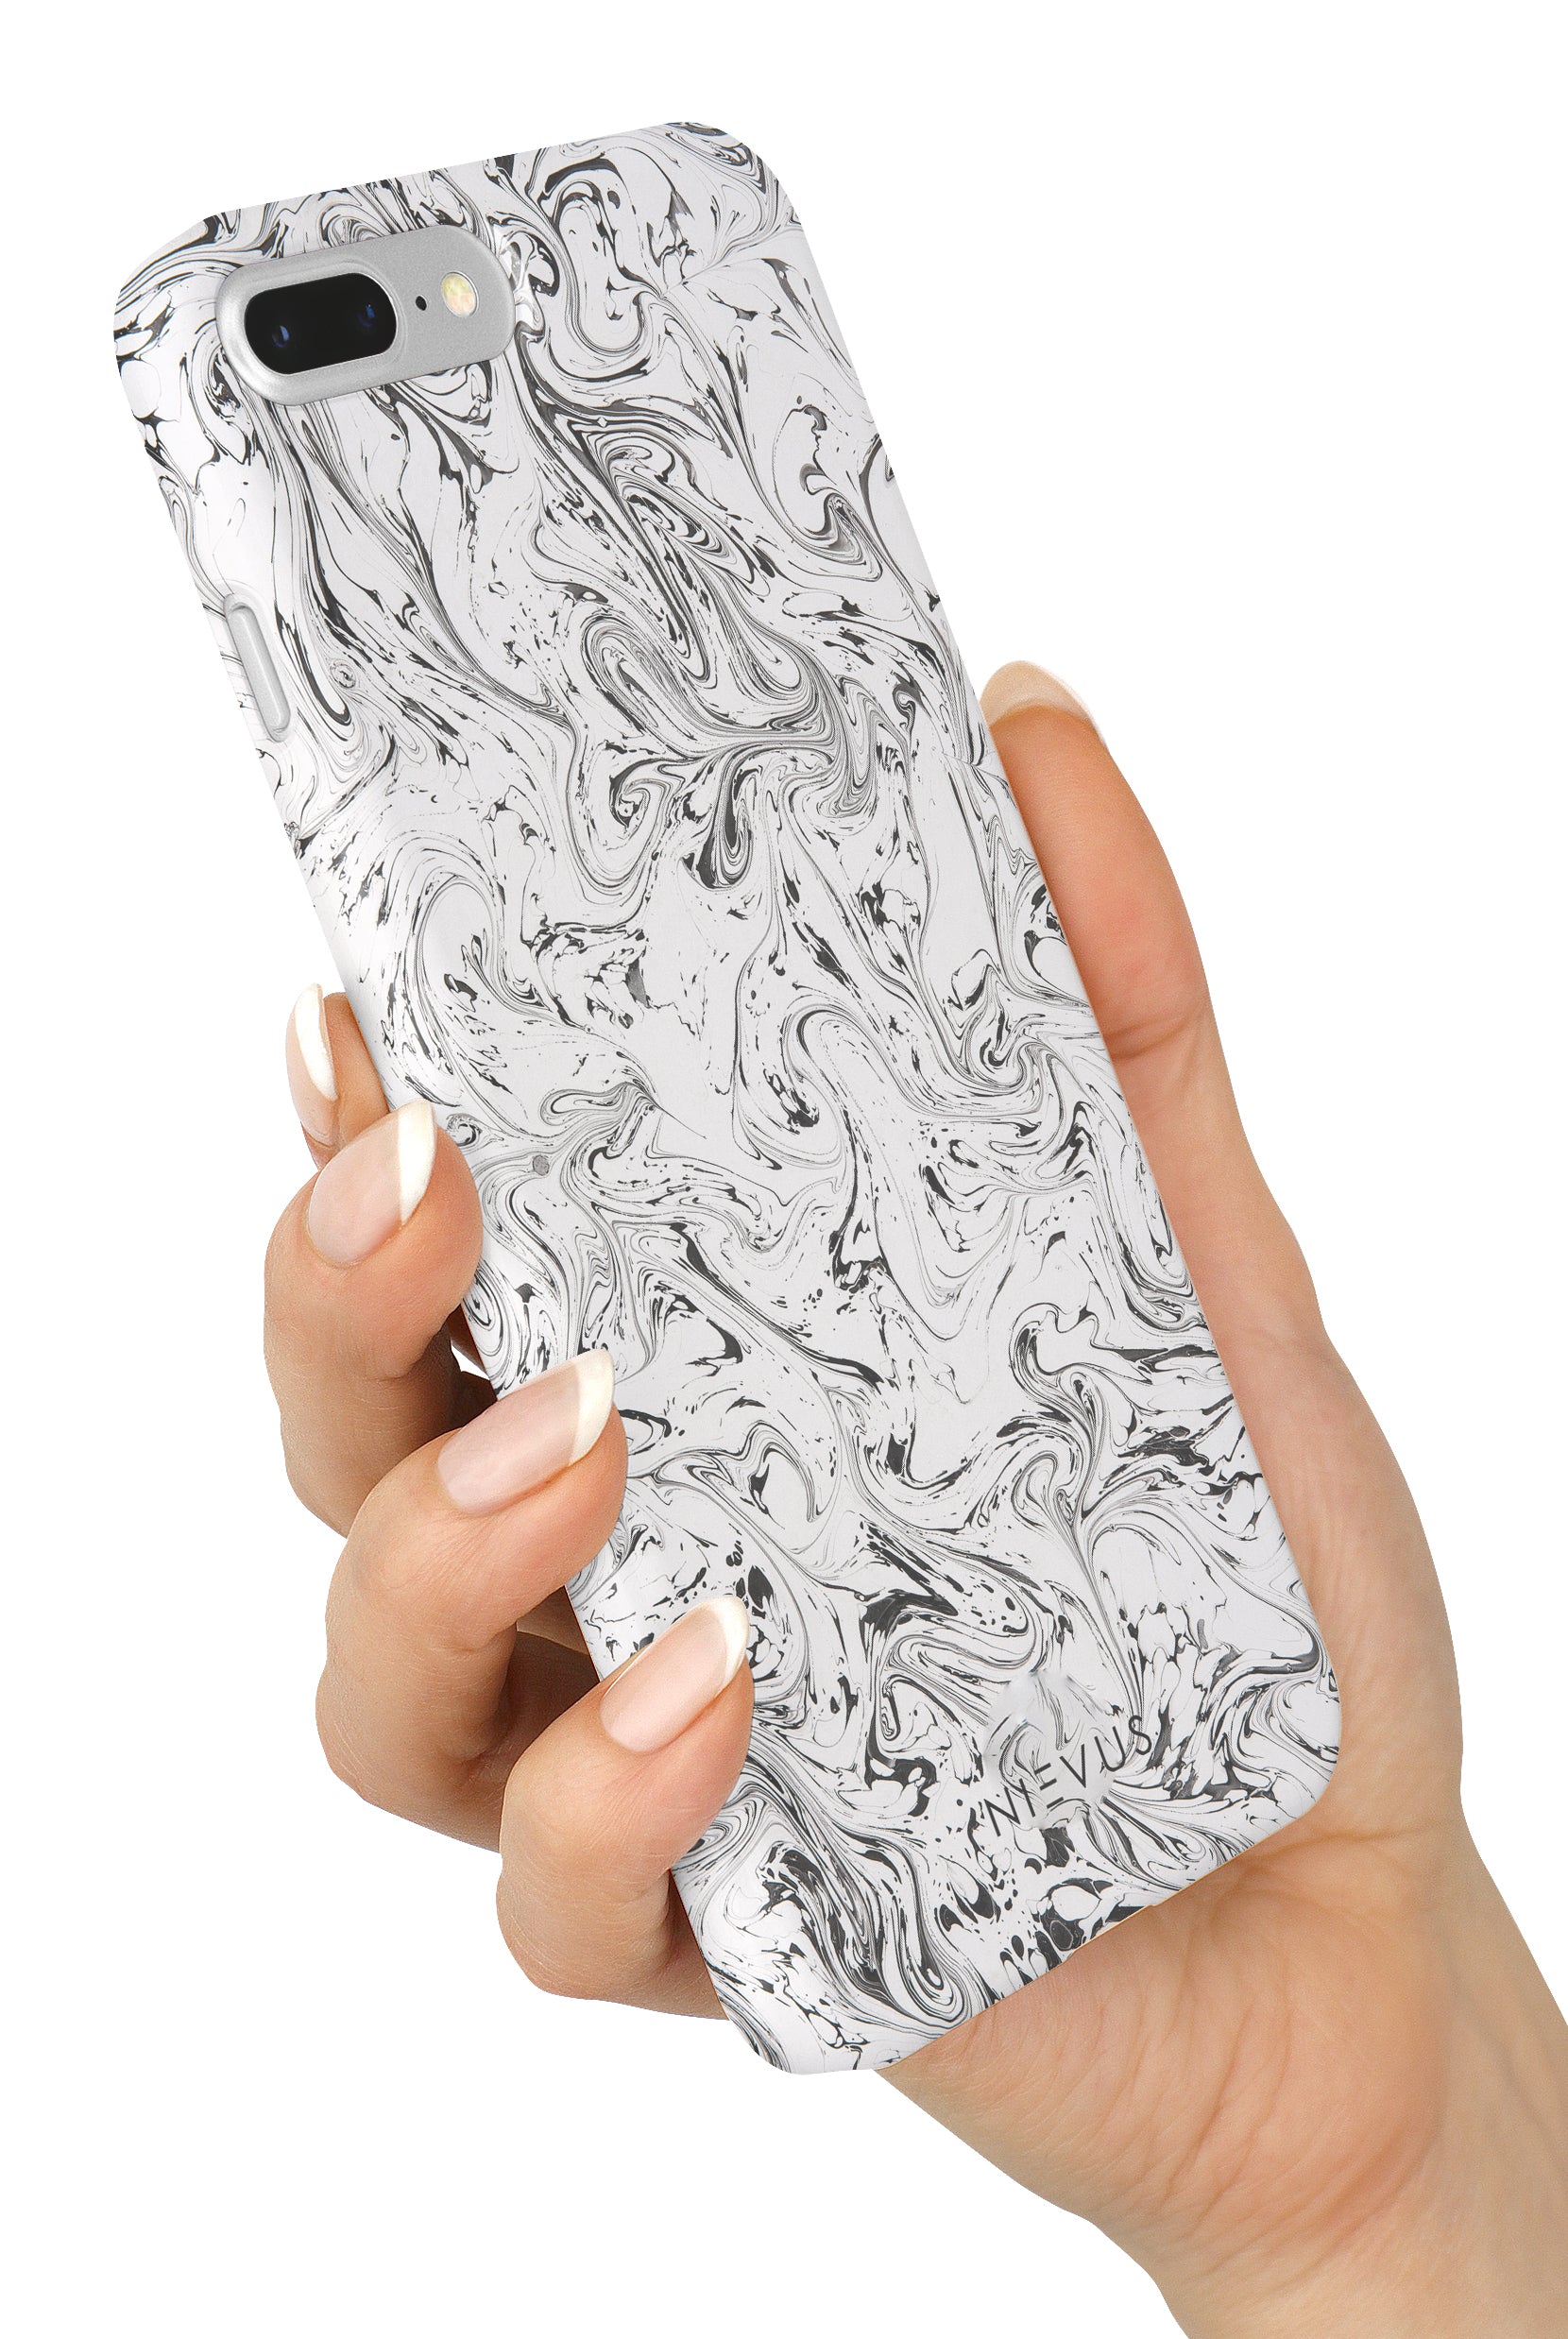 The Swirl Marble Case